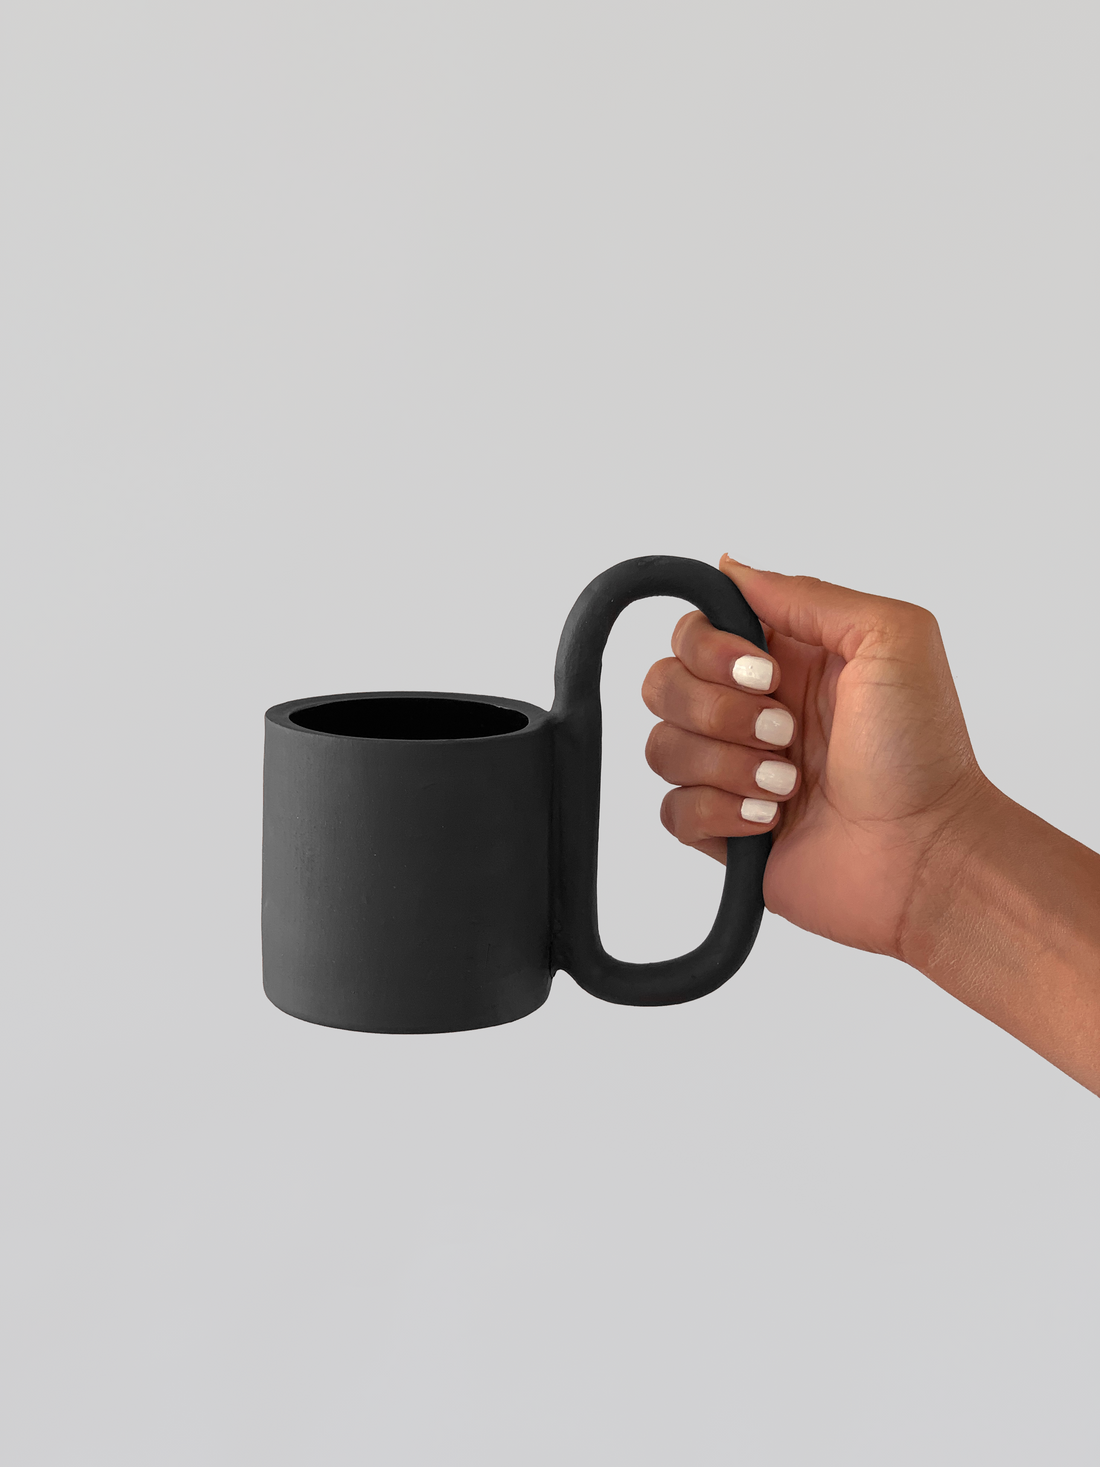 Black matte stoneware ceramic mug with a n extended oval handle.